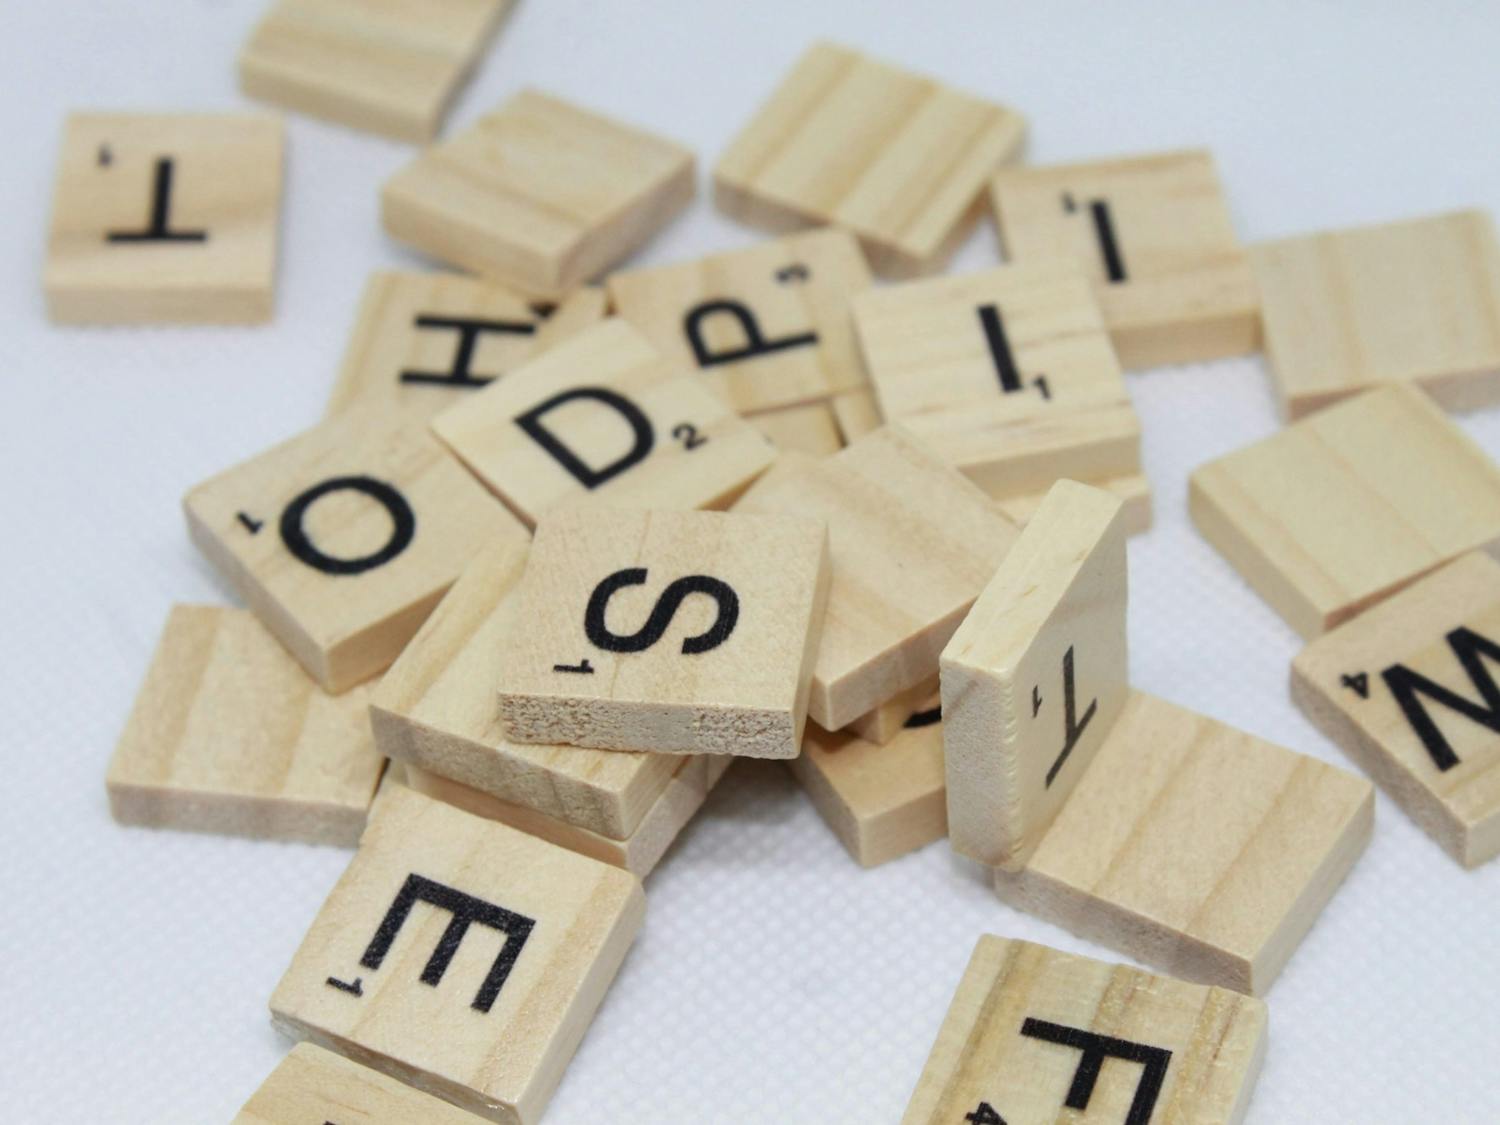 Scrabble is simple; players are given seven letters at a time to string together the best possible words while also getting the higher point squares.
